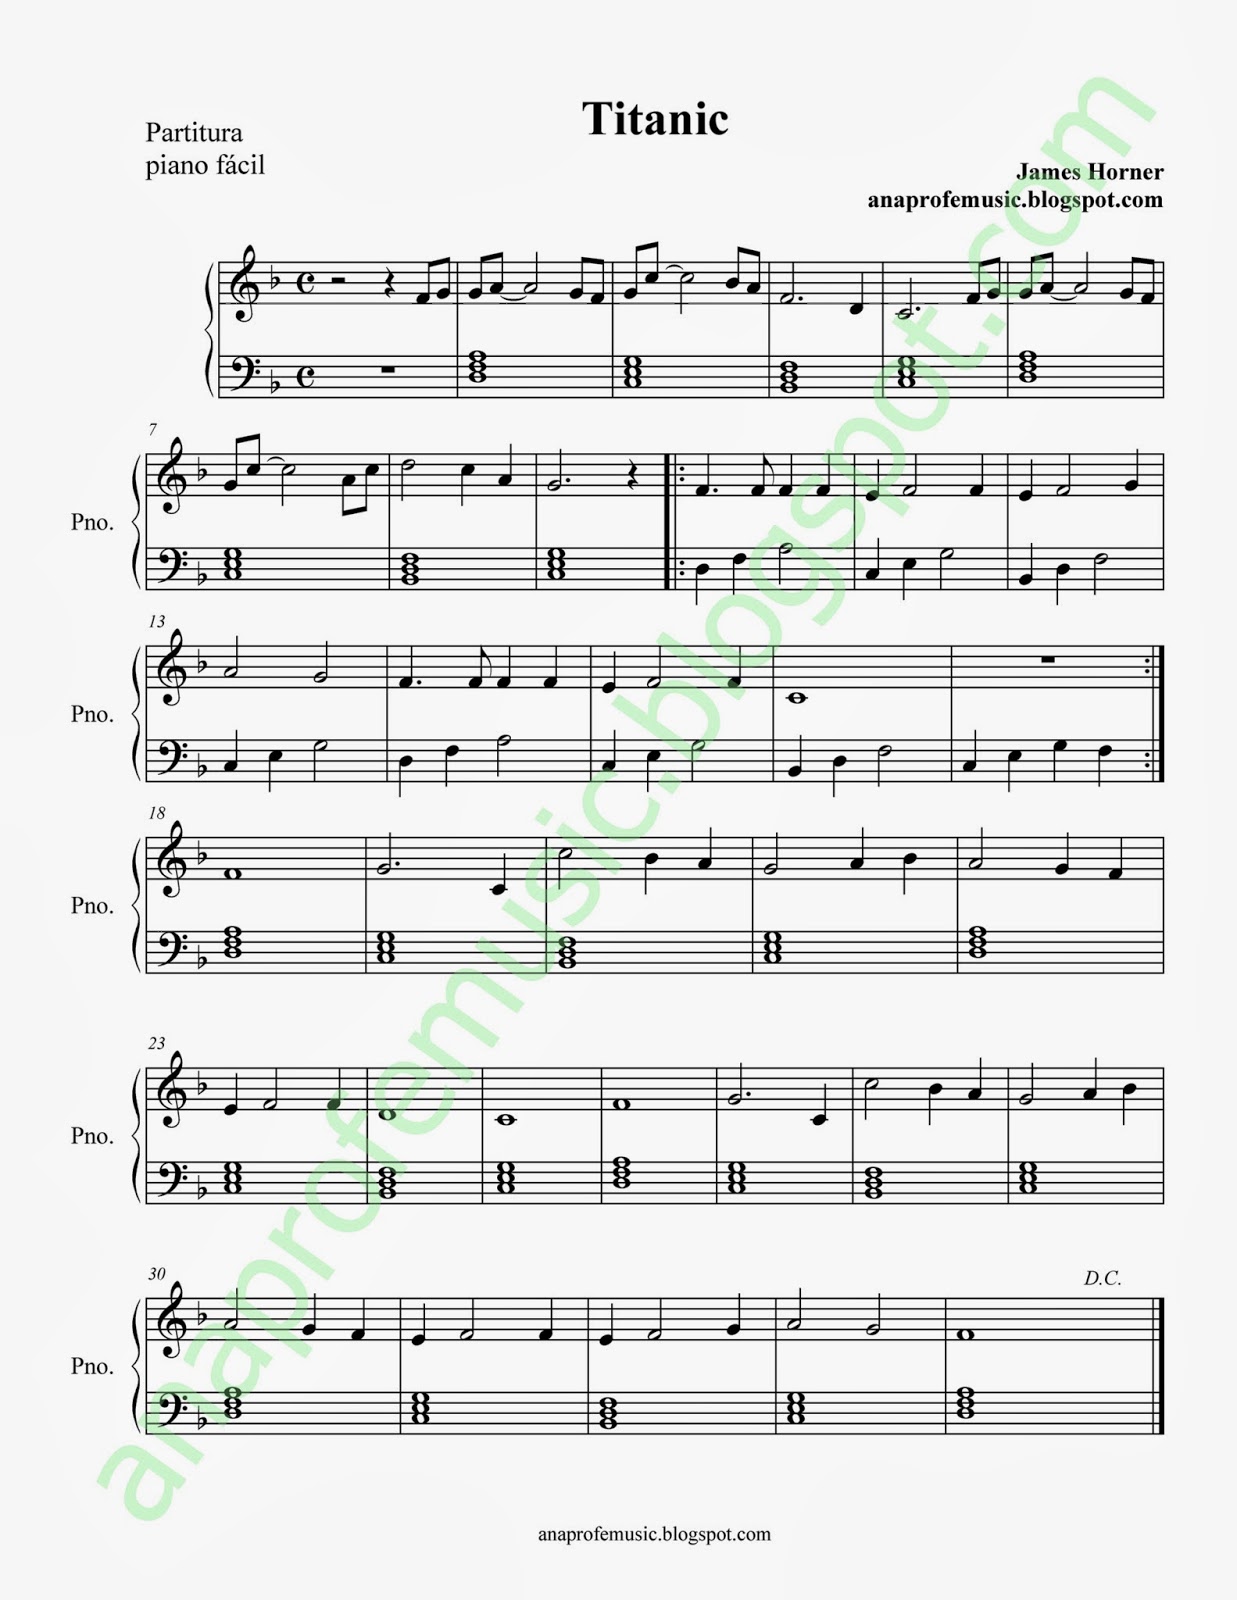 Anaprofemusic Partitura Bso Titanic Para Piano Facil The music to the film titanic was academy award winning and you may not wish to always listen to the celine dion version of 'my heart will go on but now you don't have to. partitura bso titanic para piano